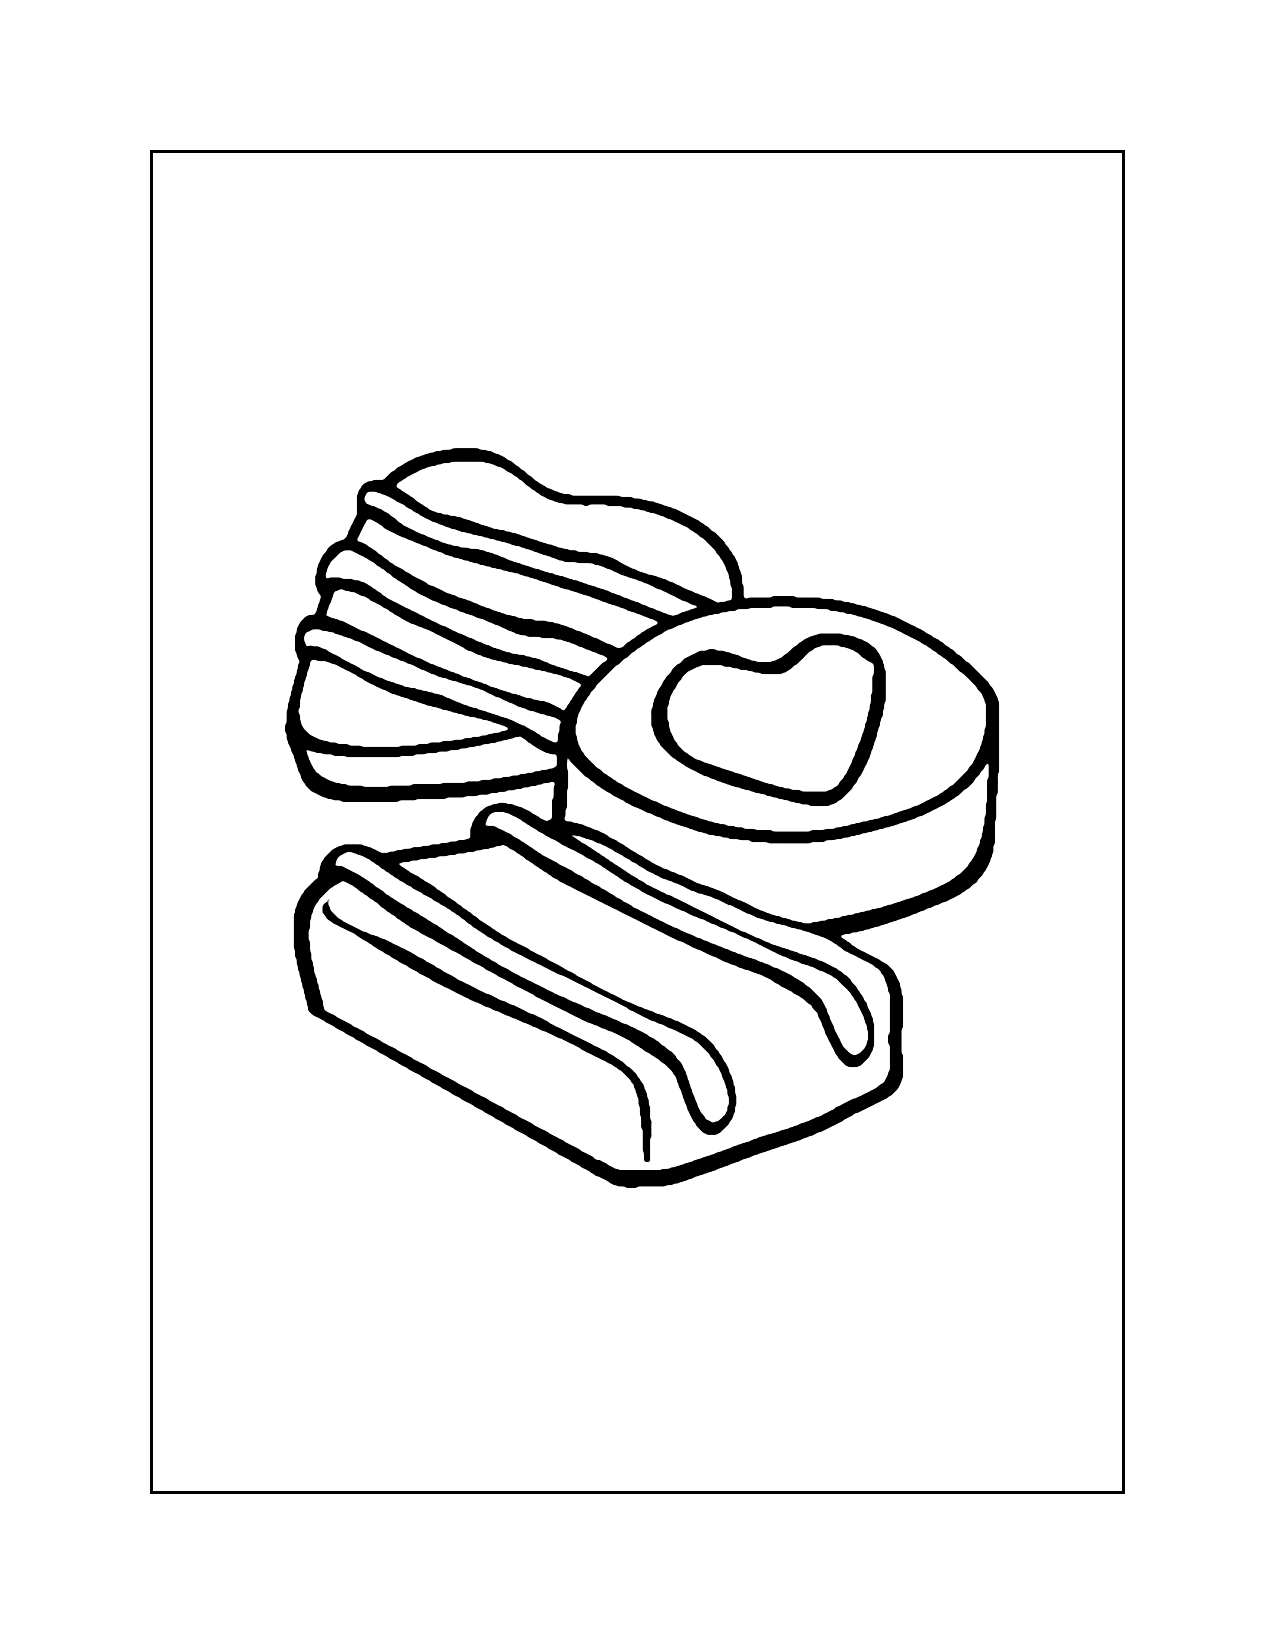 Chocolates Coloring Page